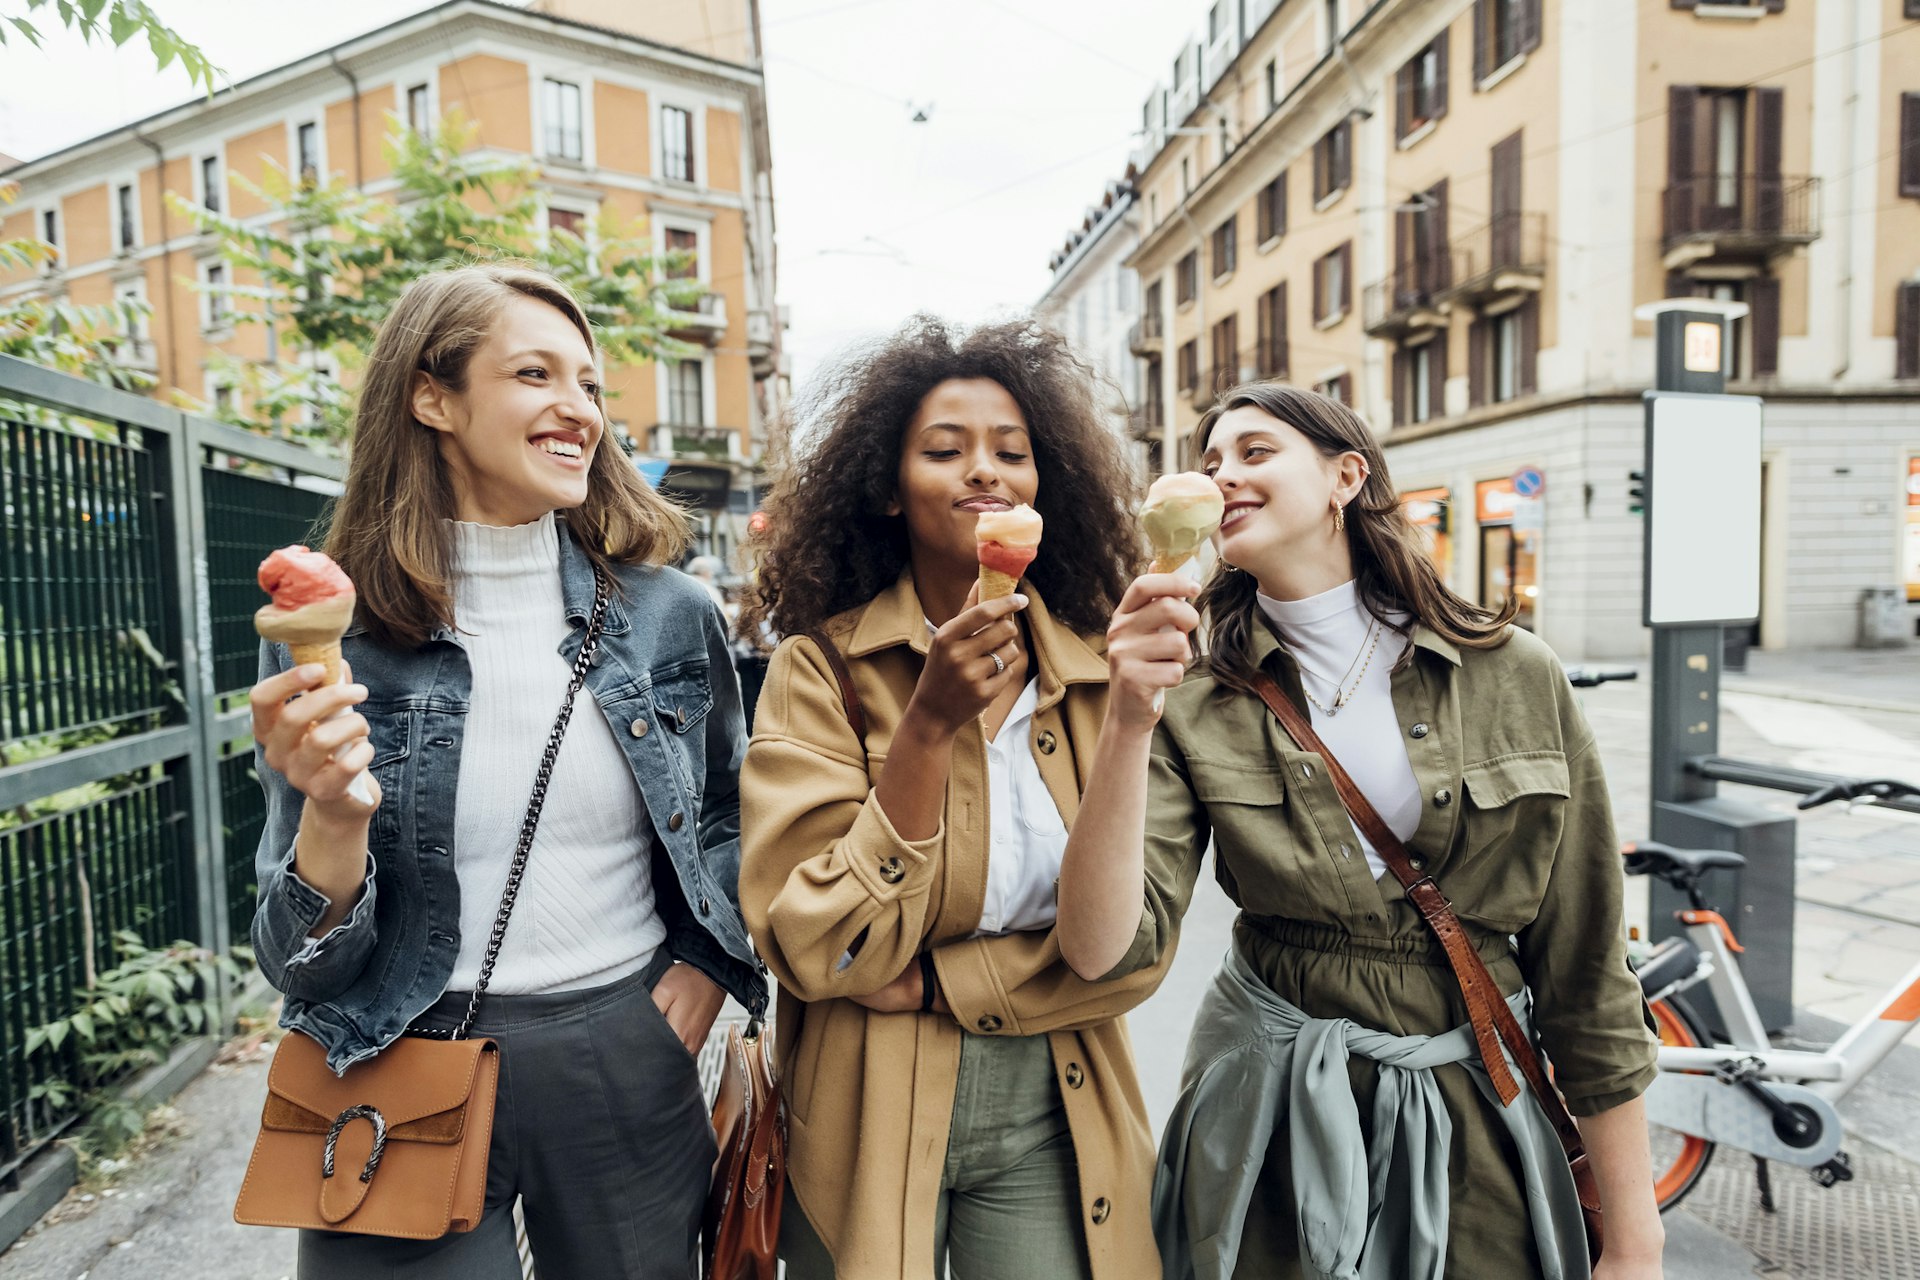 Three smiling women eating ice cream while walking in an Italian city and laughing together